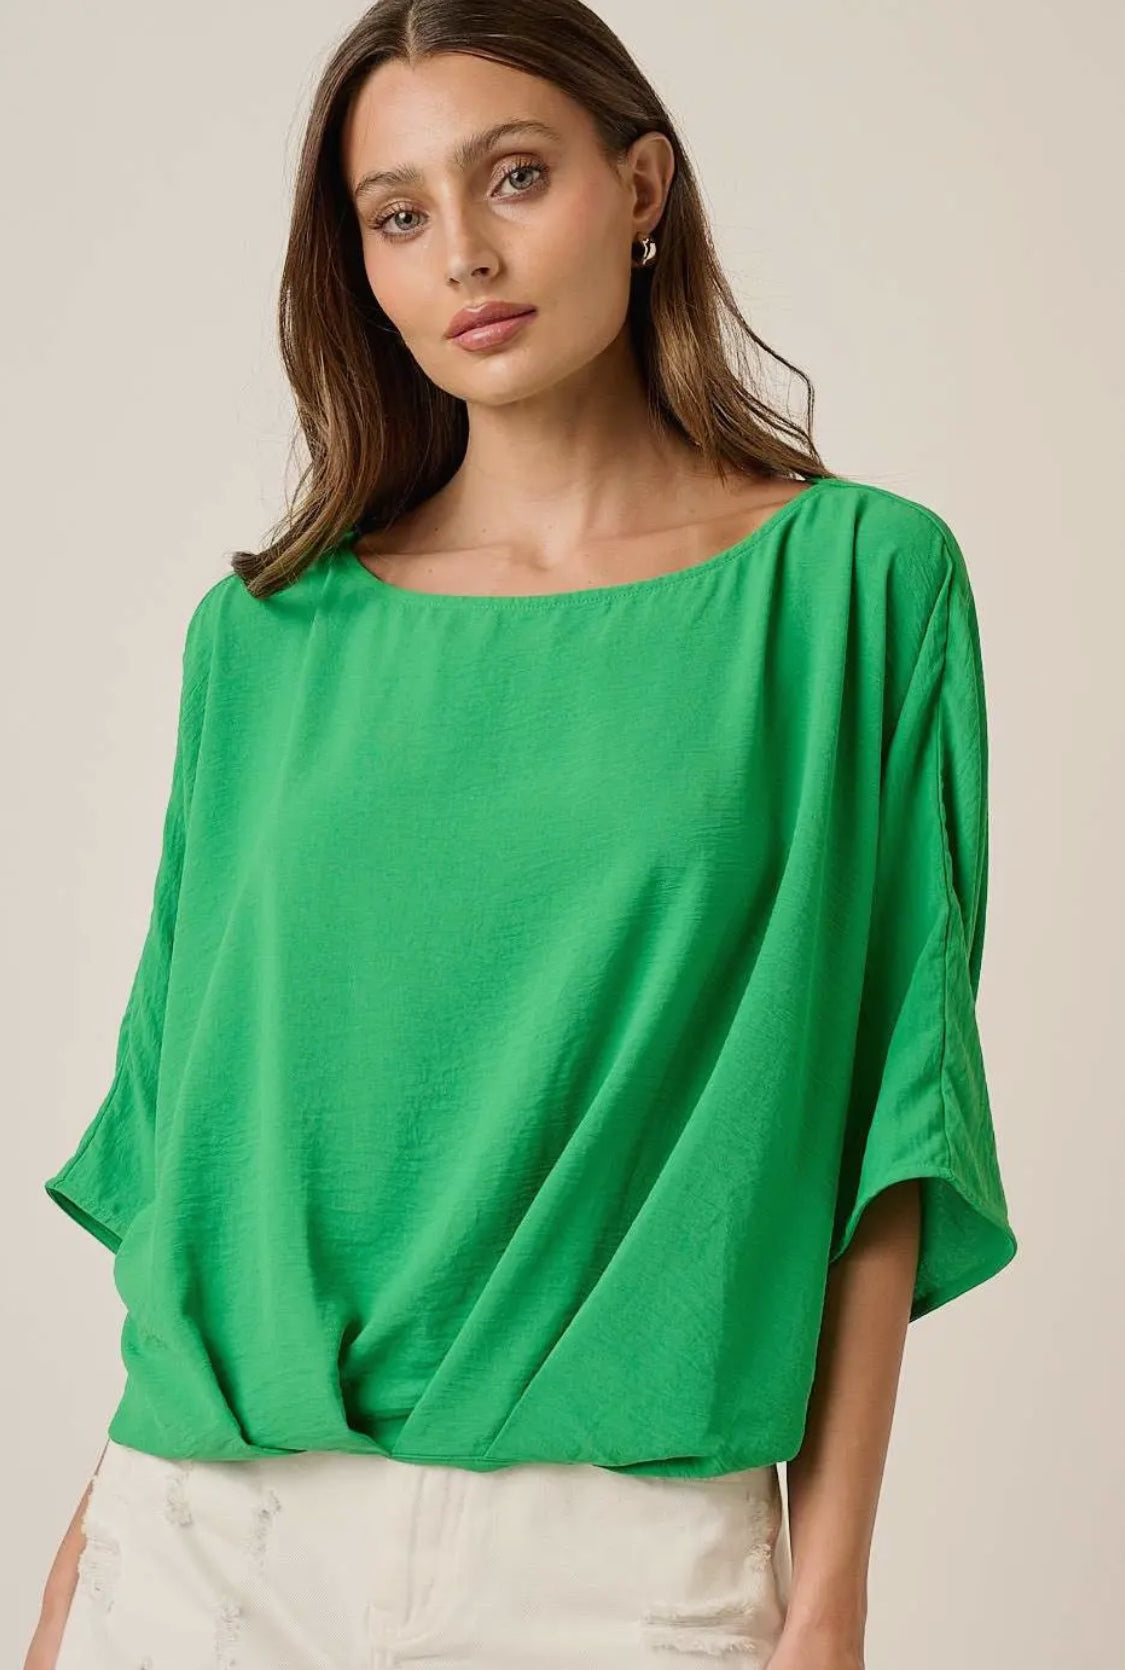 Glam Green Top